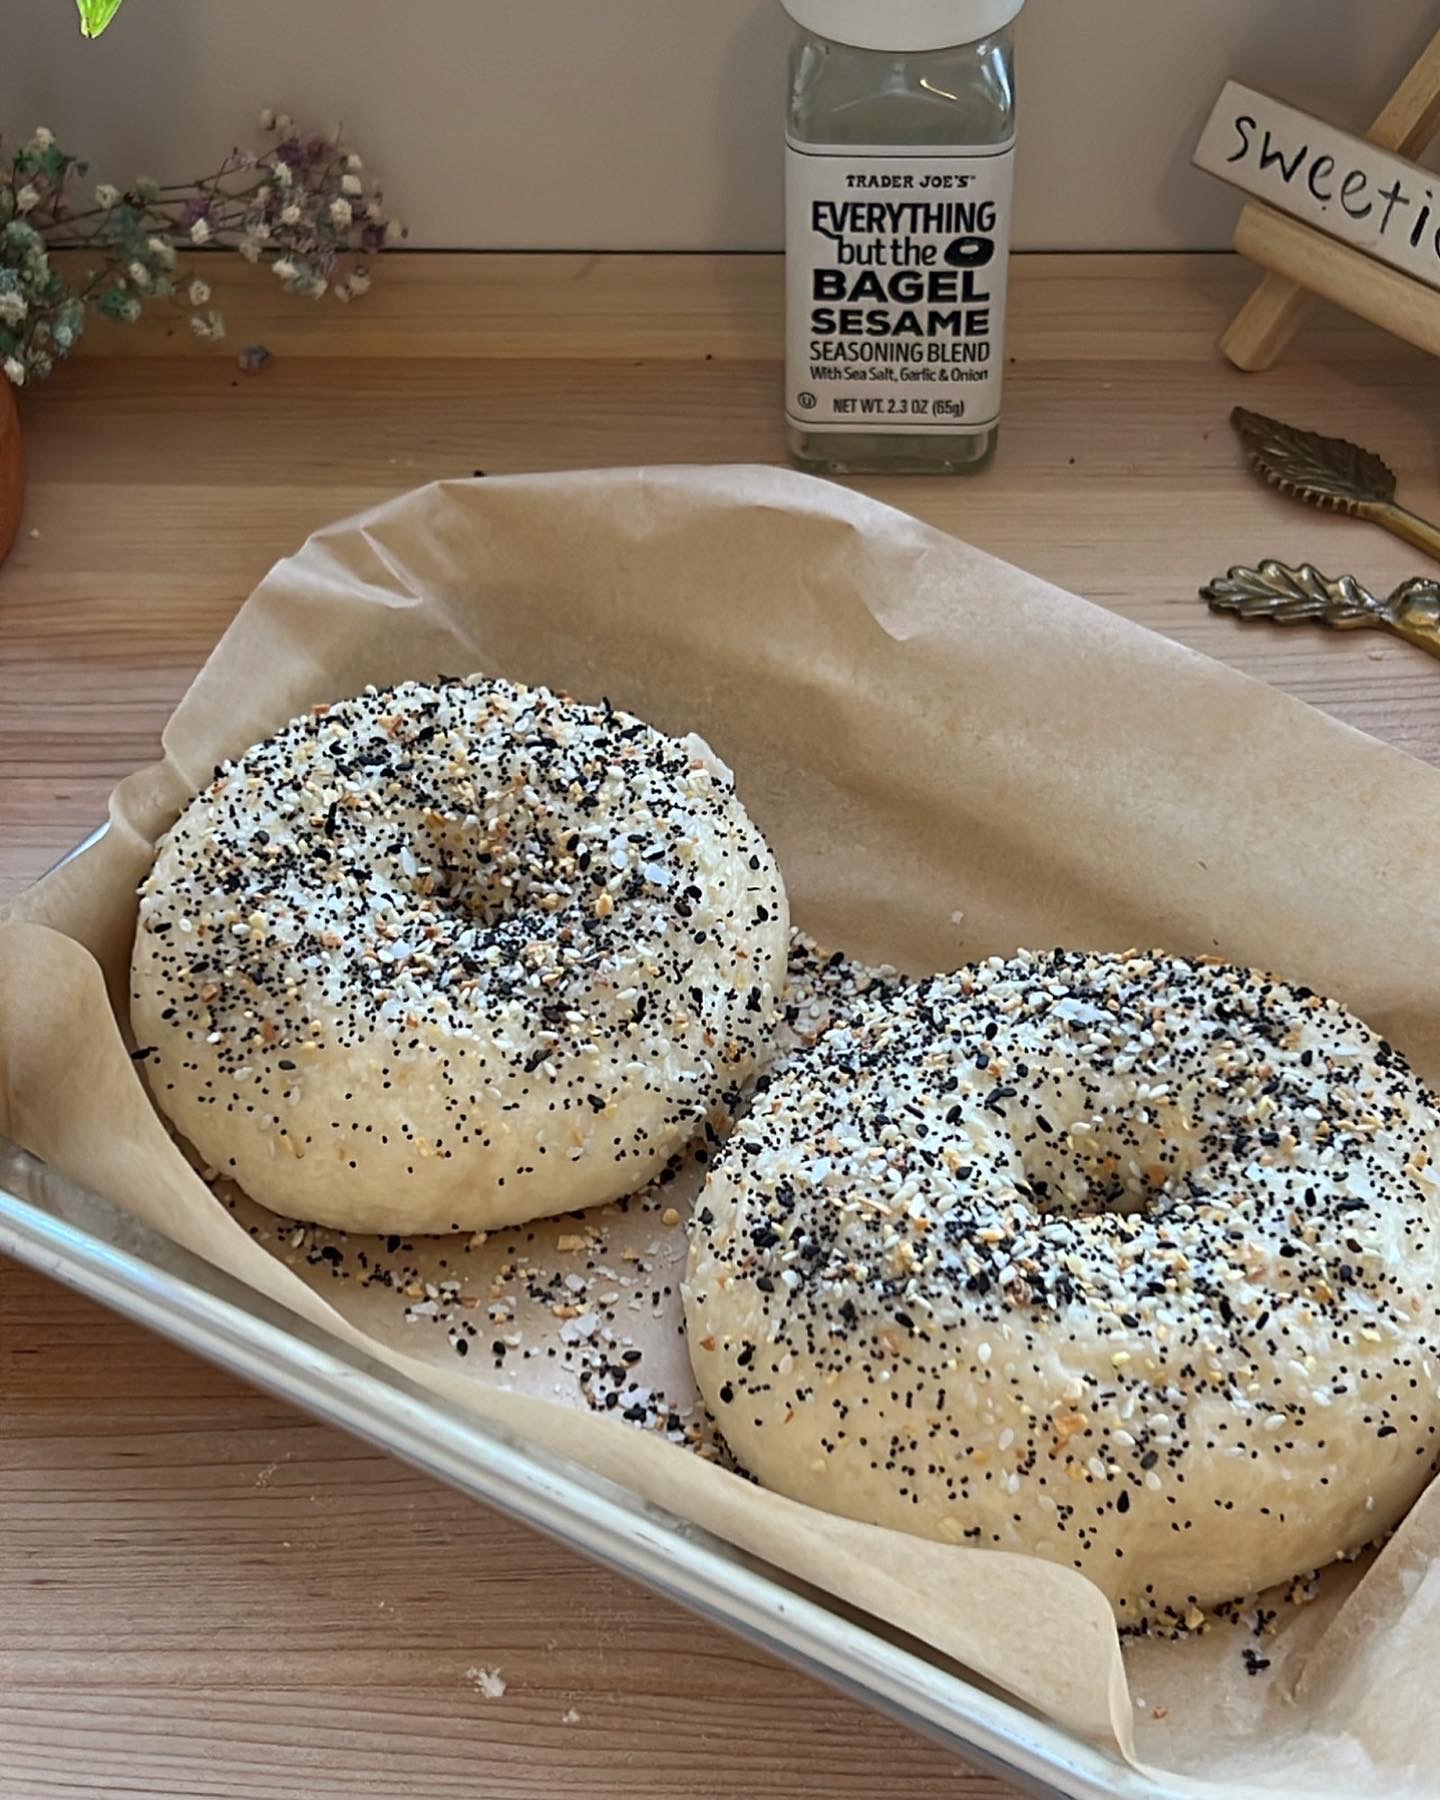 Miraculous Homemade Bagel Recipe - Once Upon a Chef